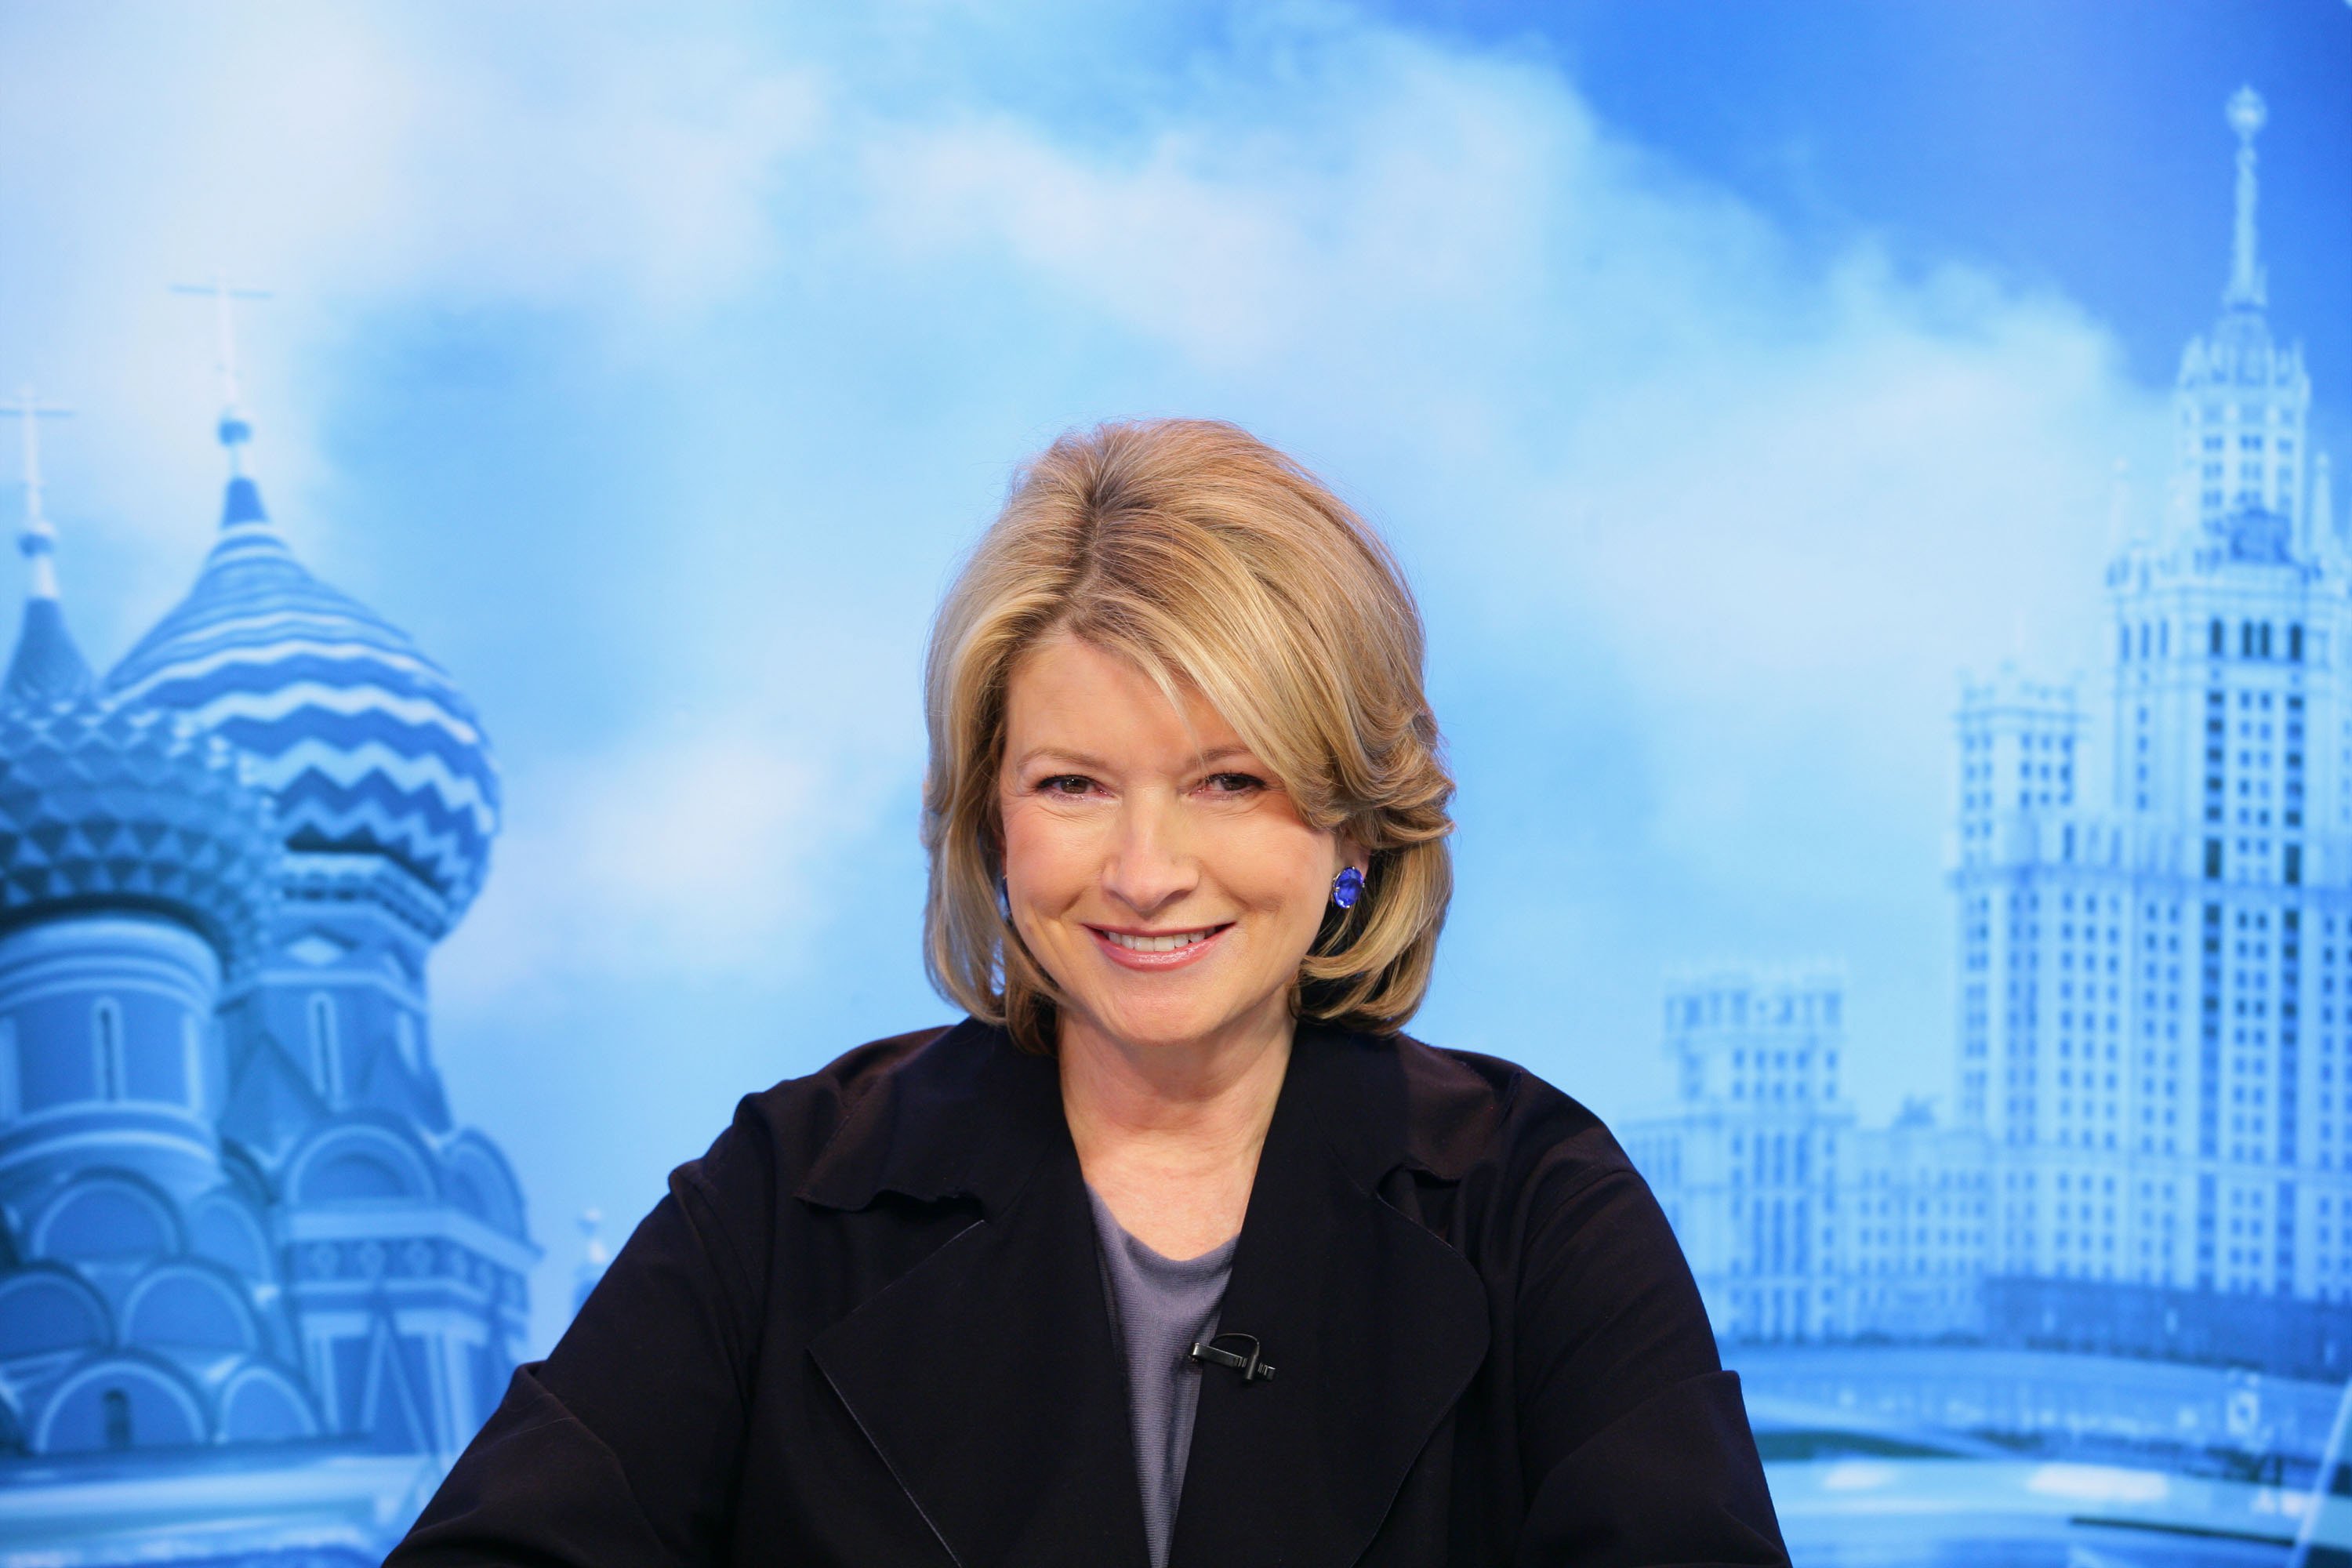 Martha Stewart poses during an interview with Bloomberg News in Moscow, Russia, on Tuesday, April 10, 2007. | Source: Getty Images